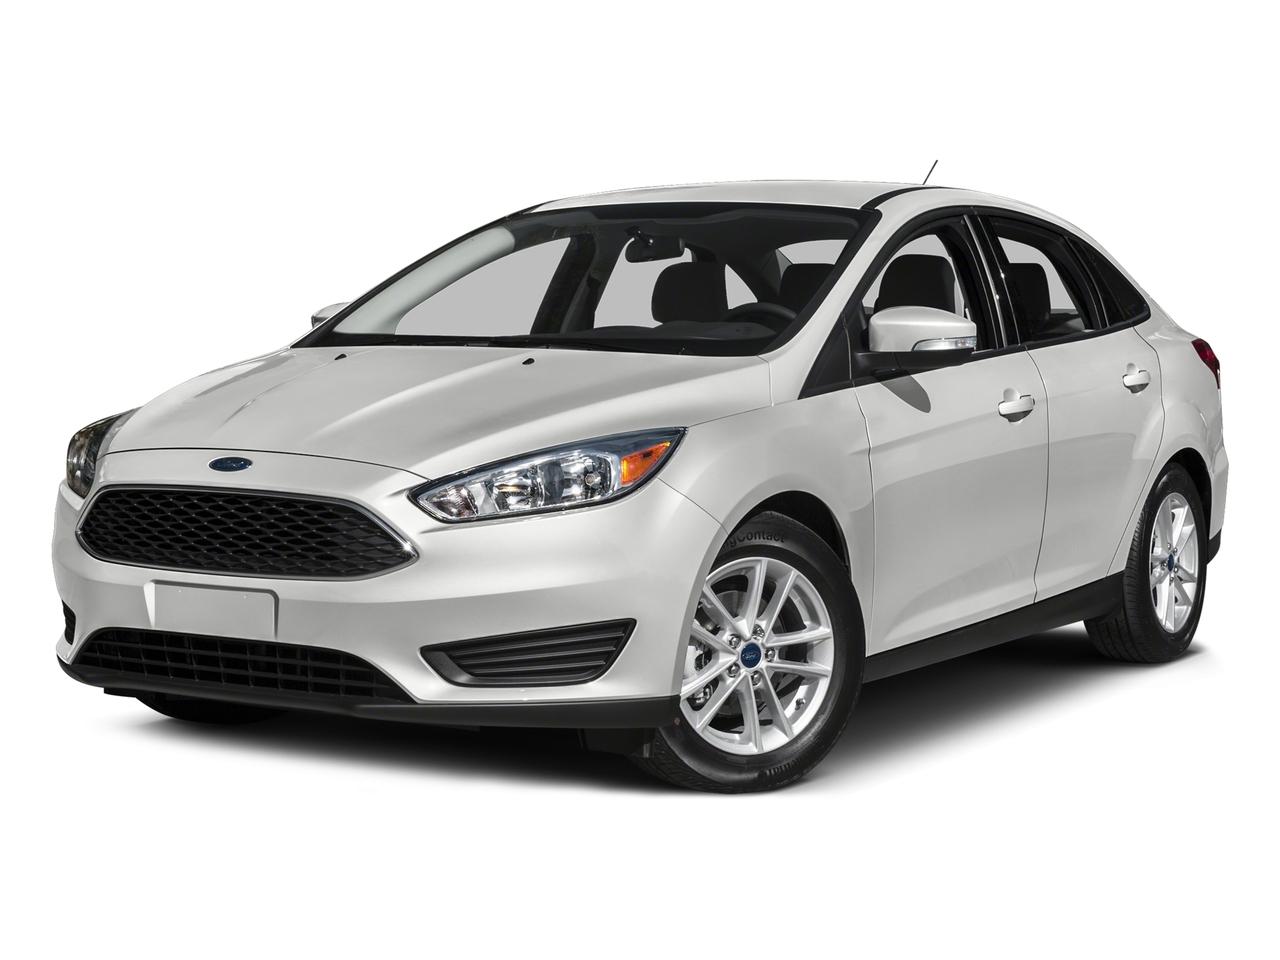 2015 Ford Focus Vehicle Photo in Trevose, PA 19053